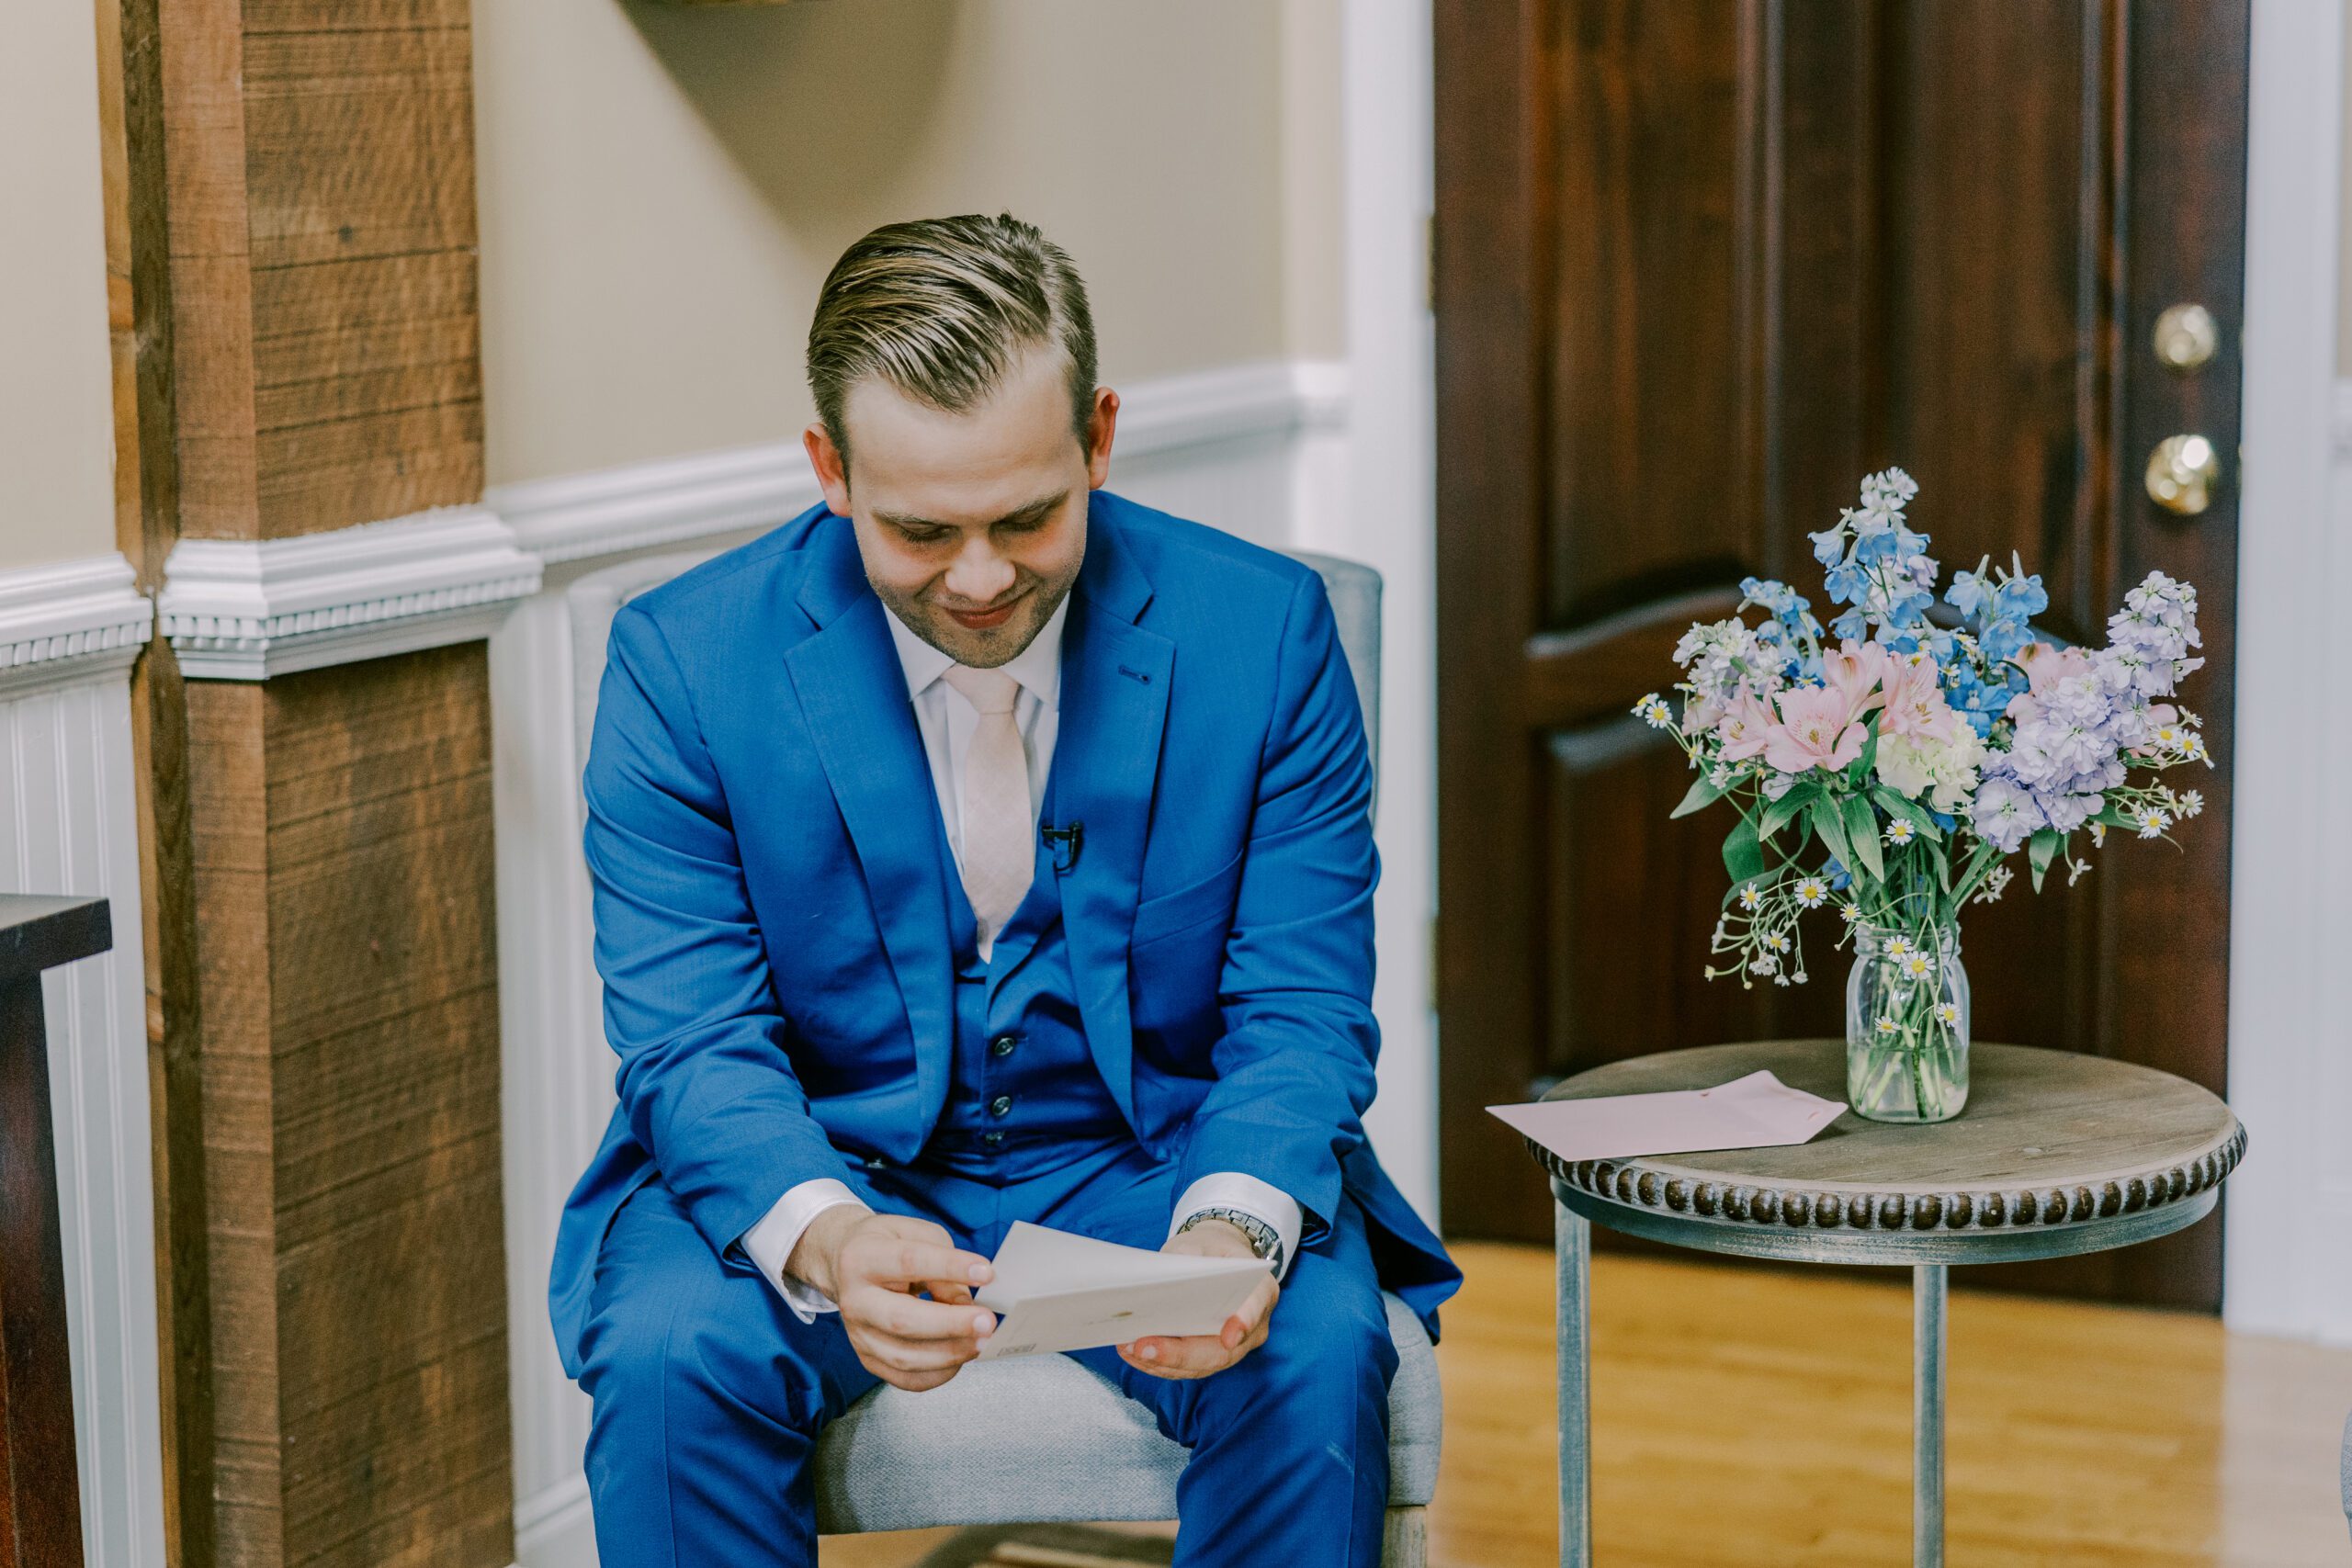 Groom sitting on a chair in a blue suit reading a card while smiling